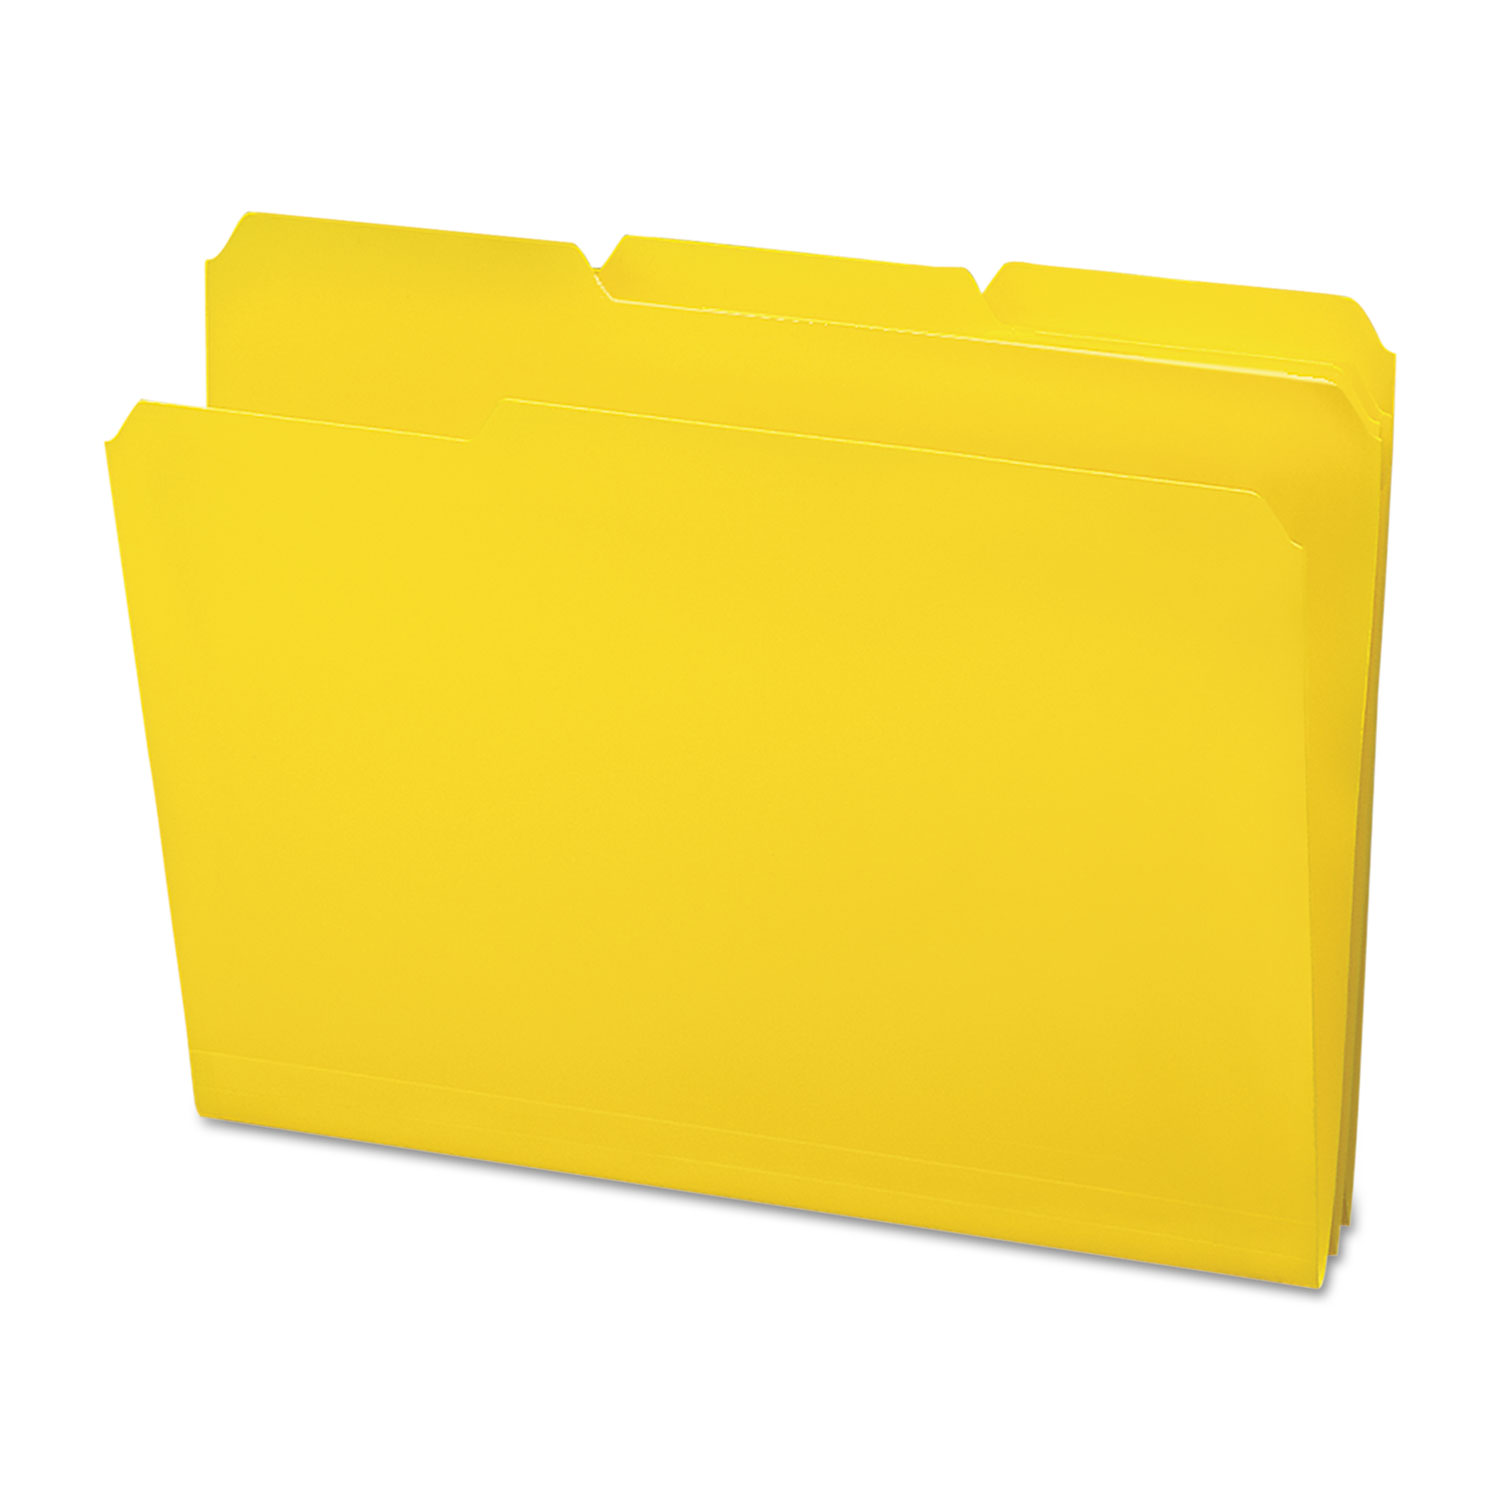  Smead 10504 Top Tab Poly Colored File Folders, 1/3-Cut Tabs, Letter Size, Yellow, 24/Box (SMD10504) 